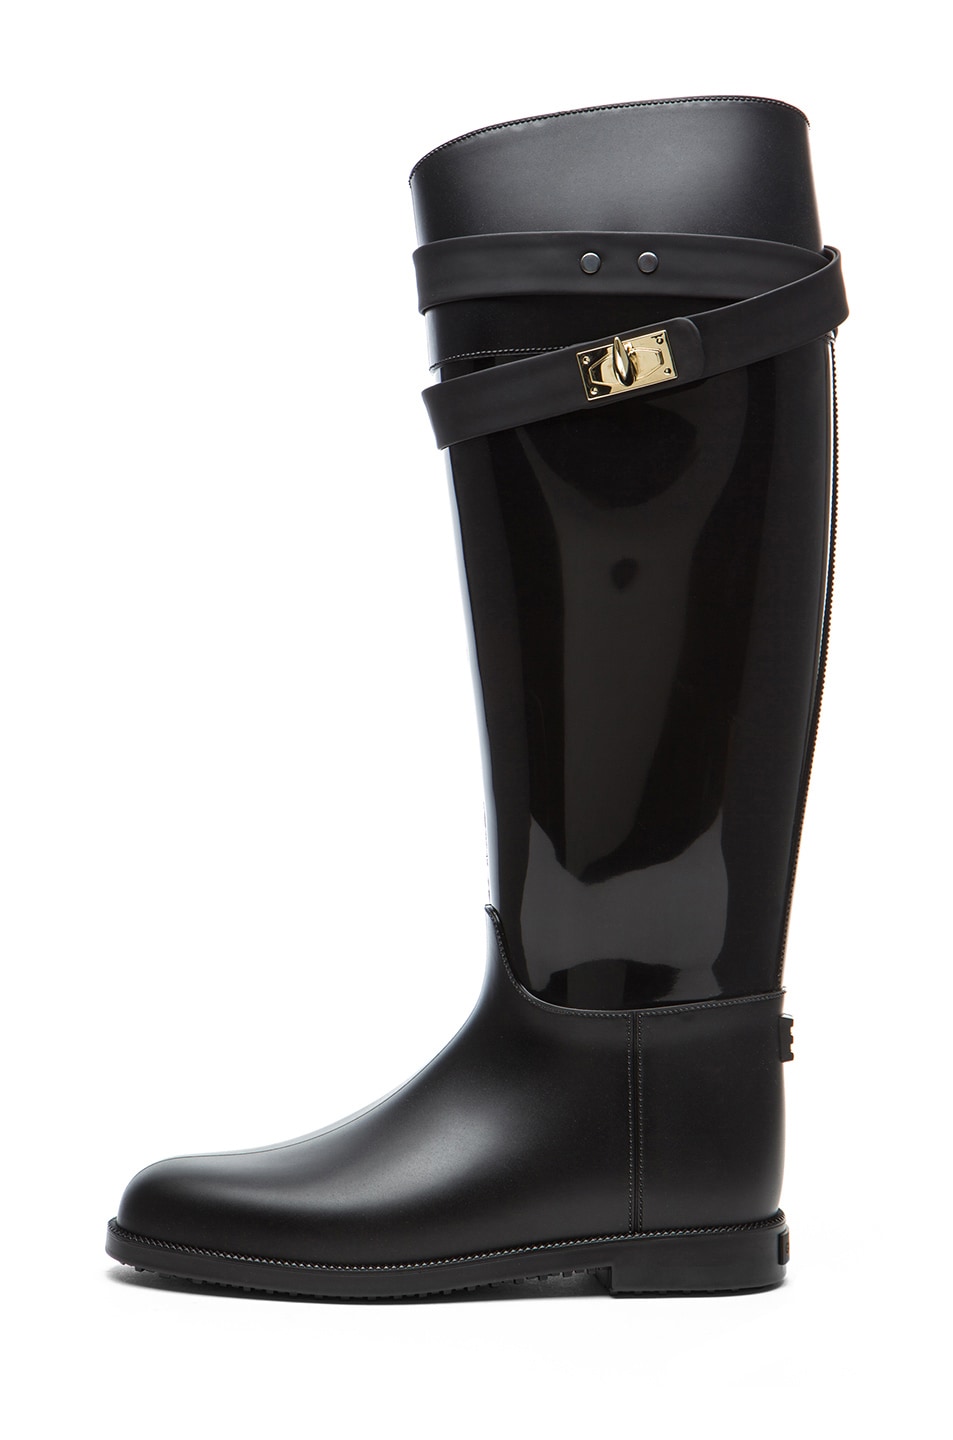 Image 1 of Givenchy Rider Shark Lock Rubber Rain Boot in Black